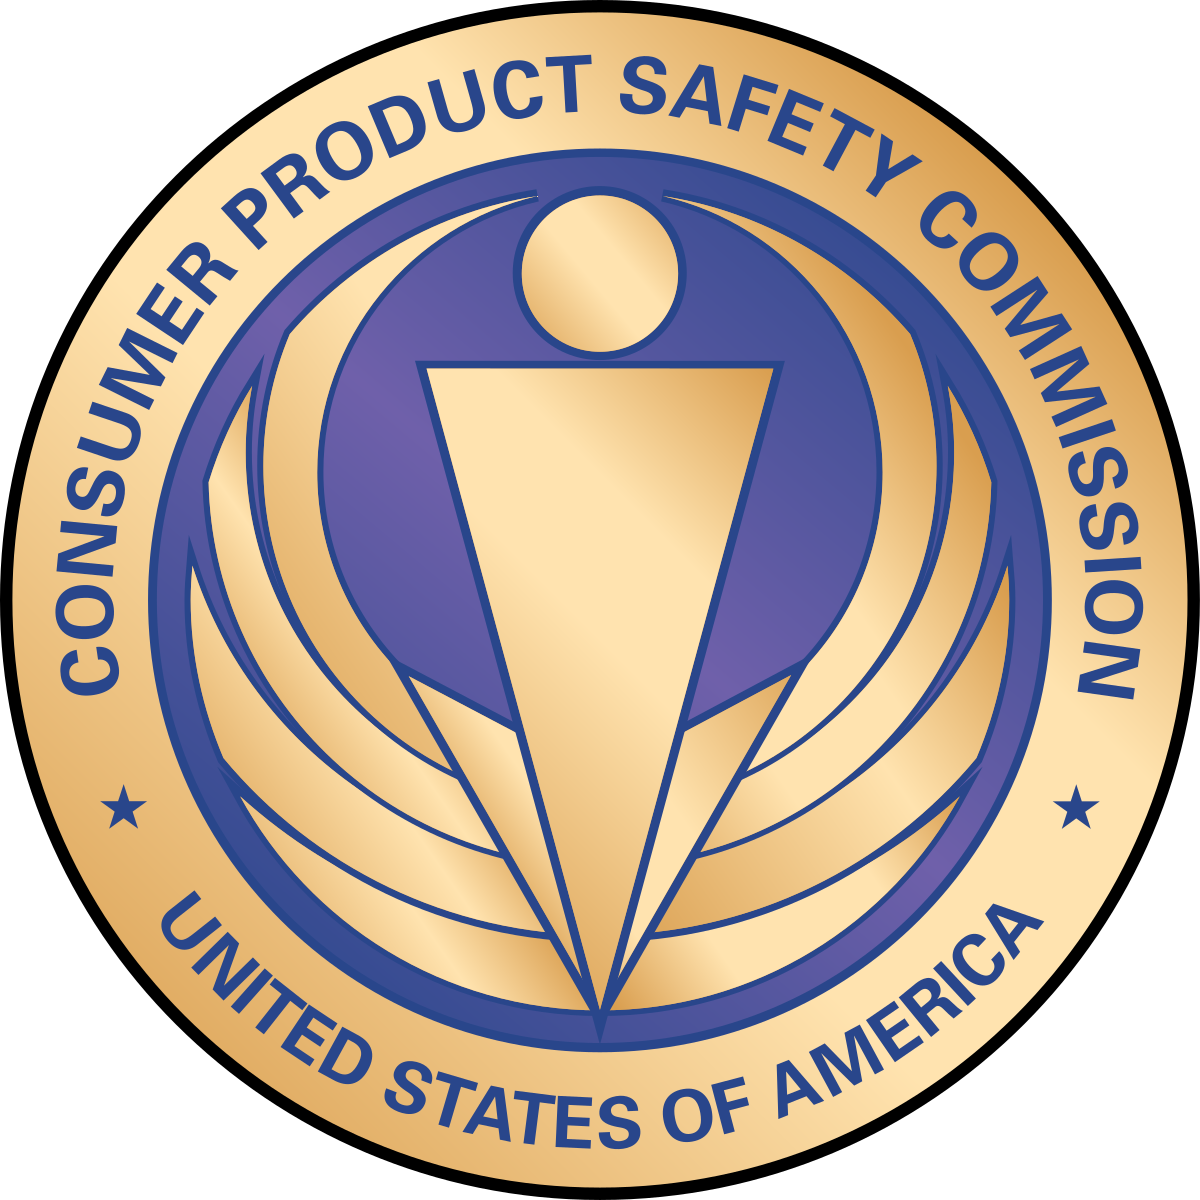 Consumer Product Safety Commission Needs New Leadership - Consumer Product Safety Commission Purpose (1200x1200)